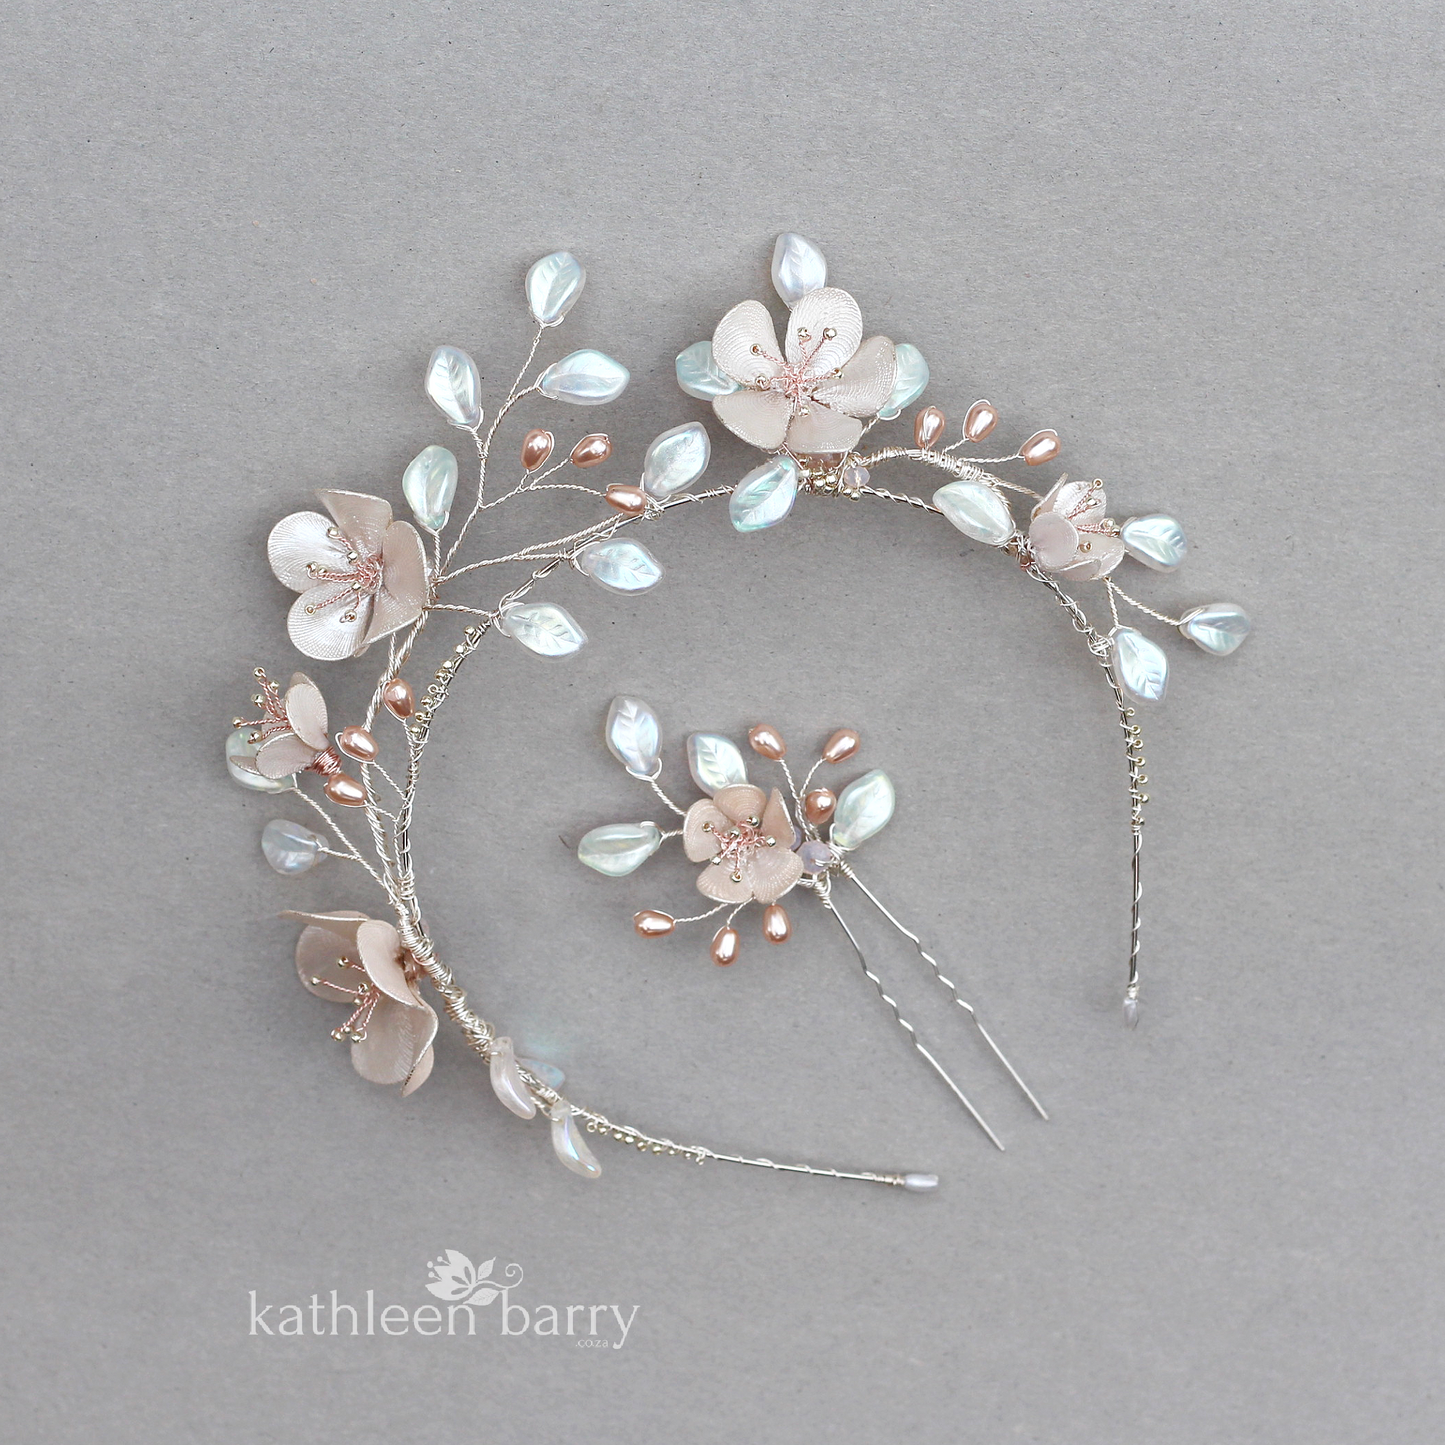 Bespoke blossom hair pin - assorted colors available - Detailed images still to be loaded